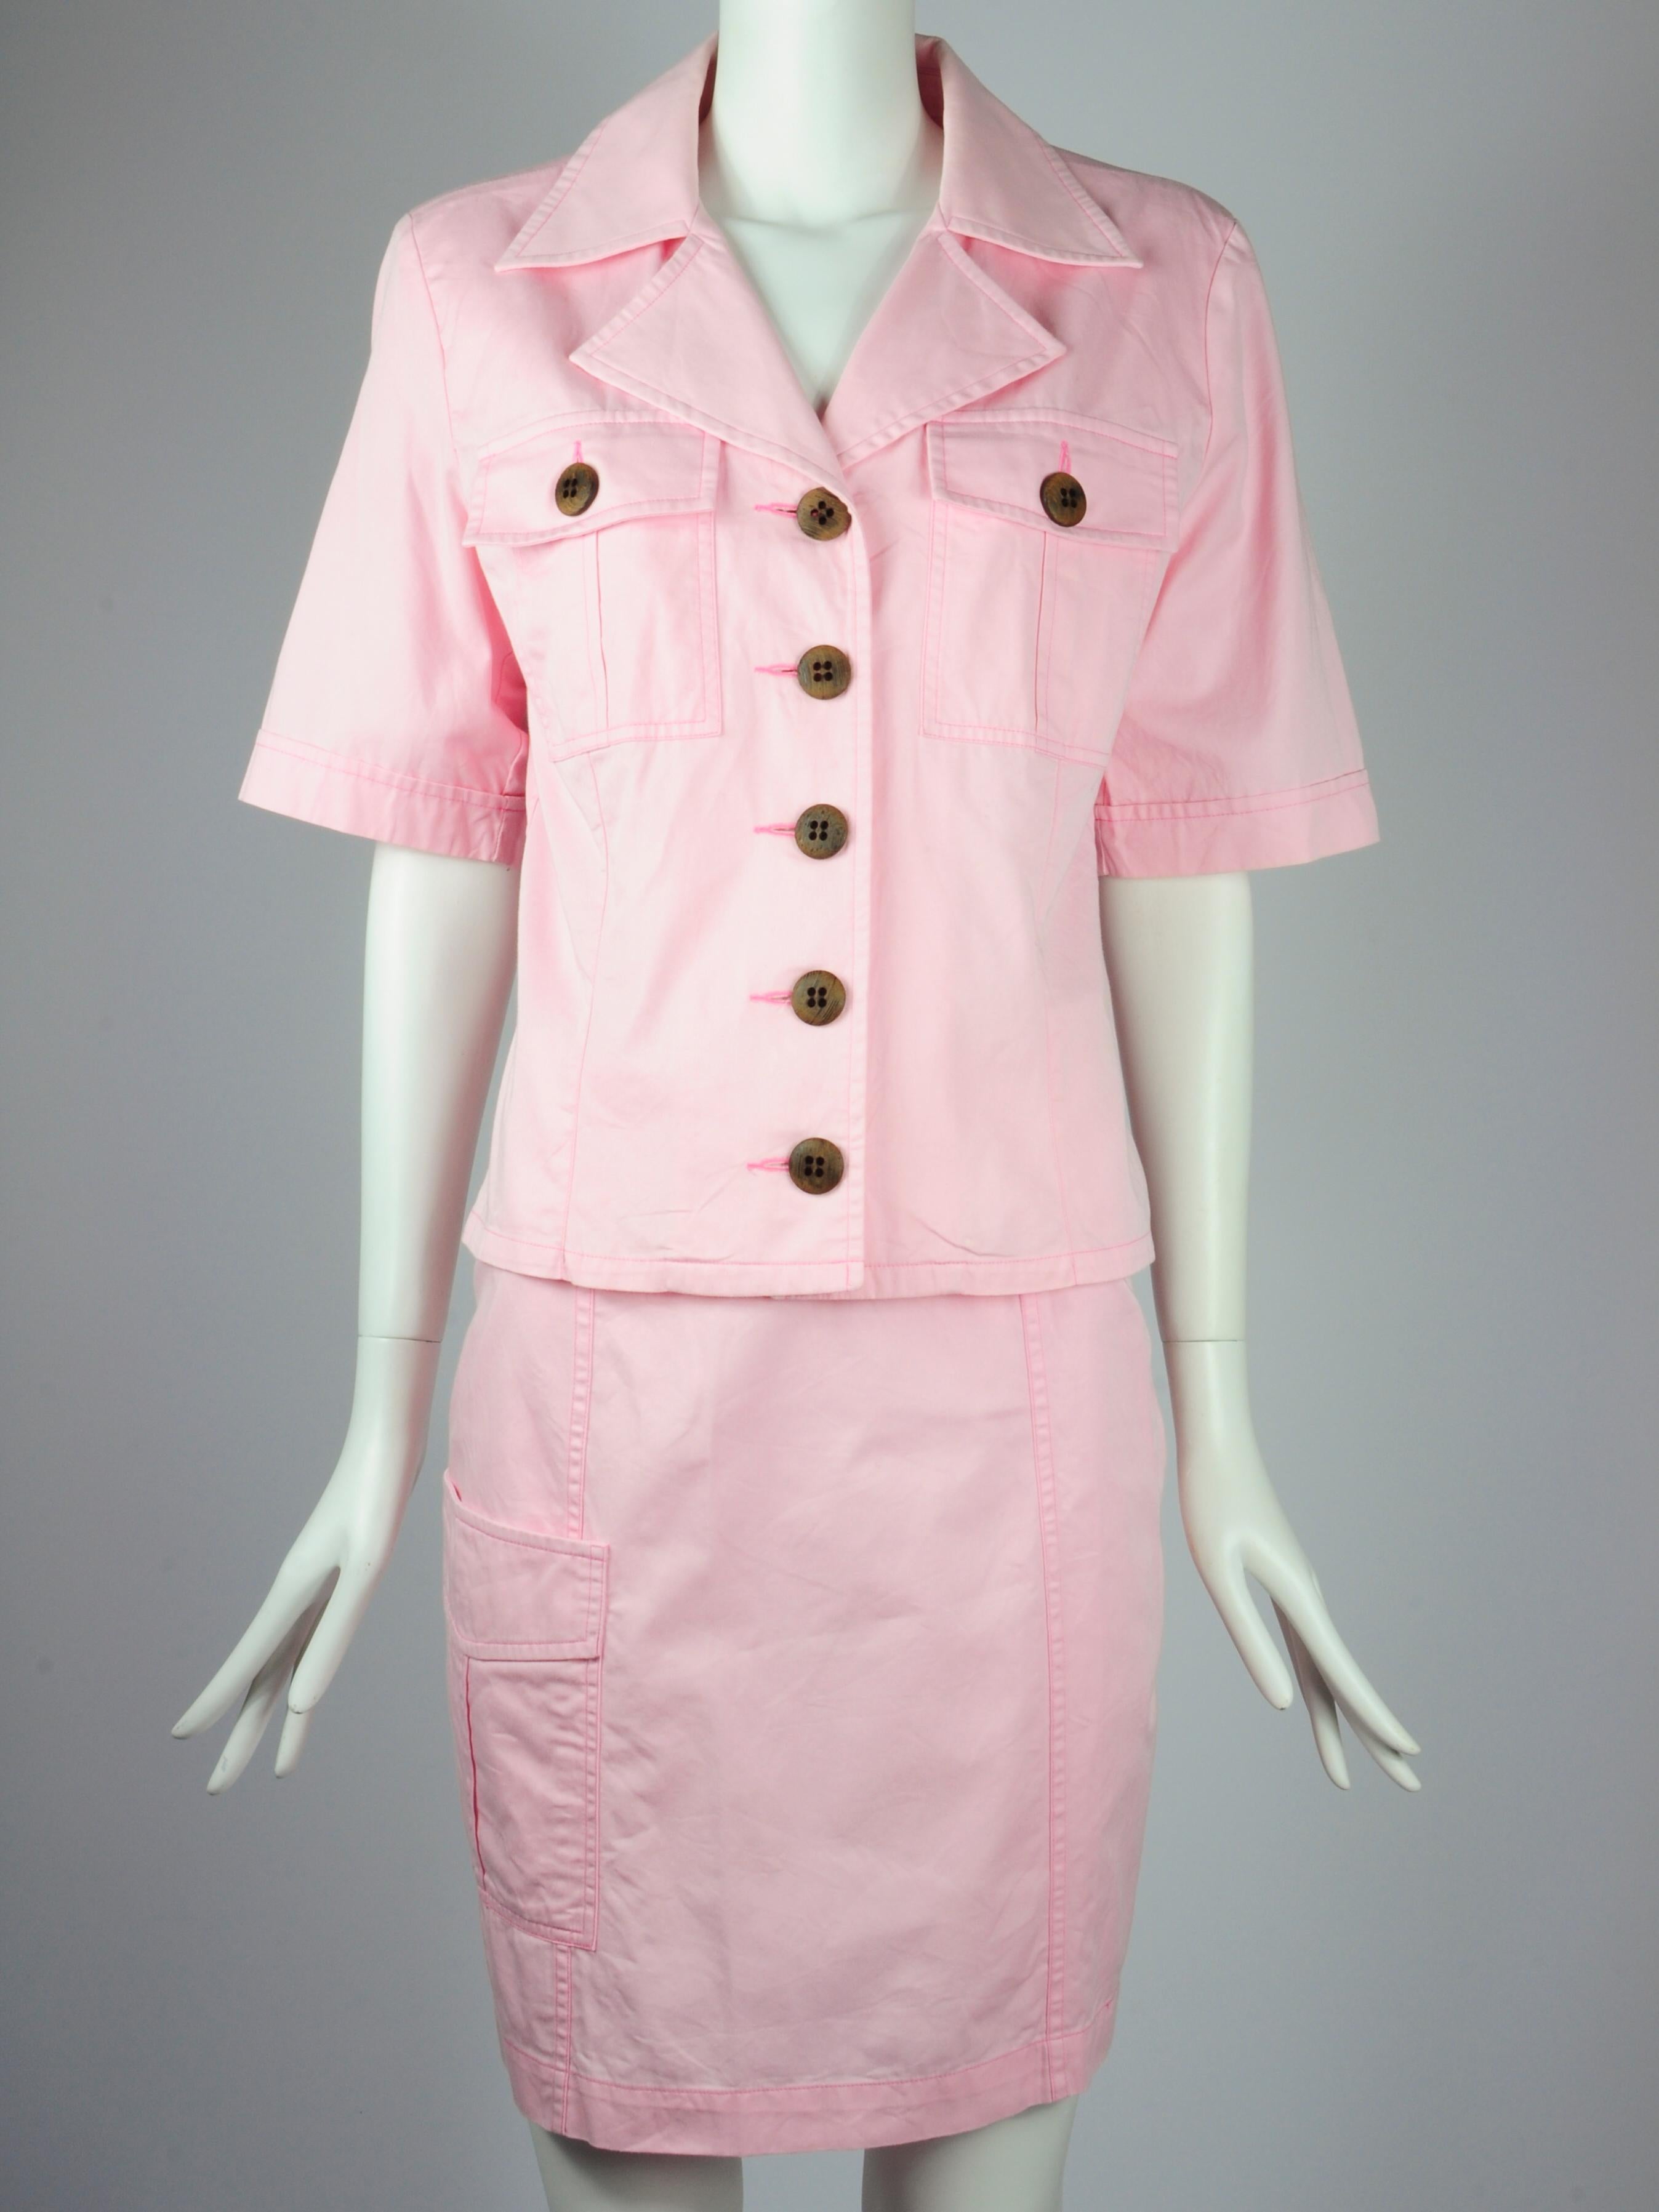 Yves Saint Laurent Saharienne Safari Two Piece Skirt Suit Set Pink Pockets 1990s In Good Condition For Sale In AMSTERDAM, NL